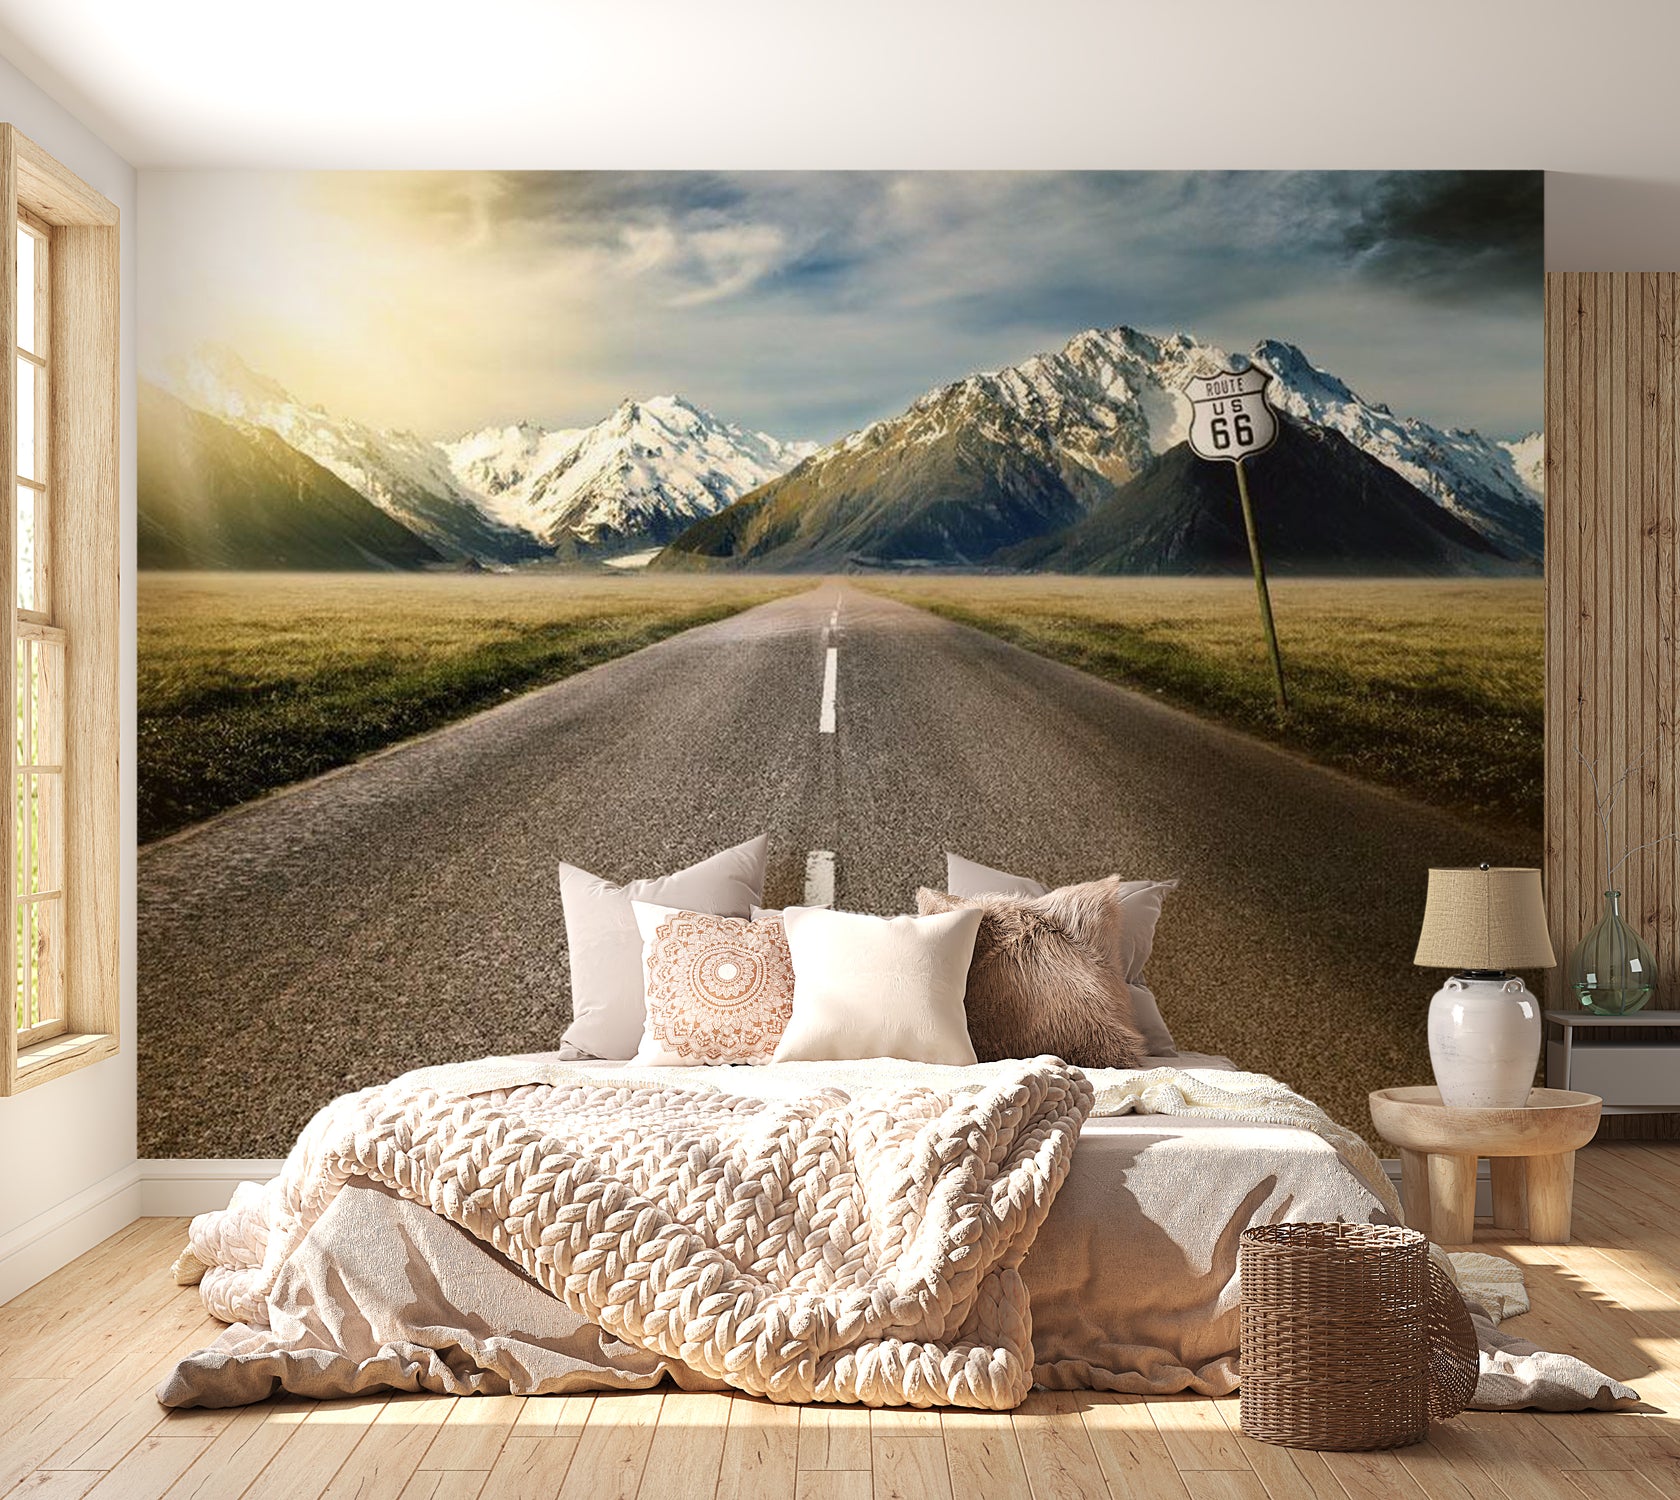 Peel & Stick Nature Wall Mural - The Long Road - Removable Wall Decals